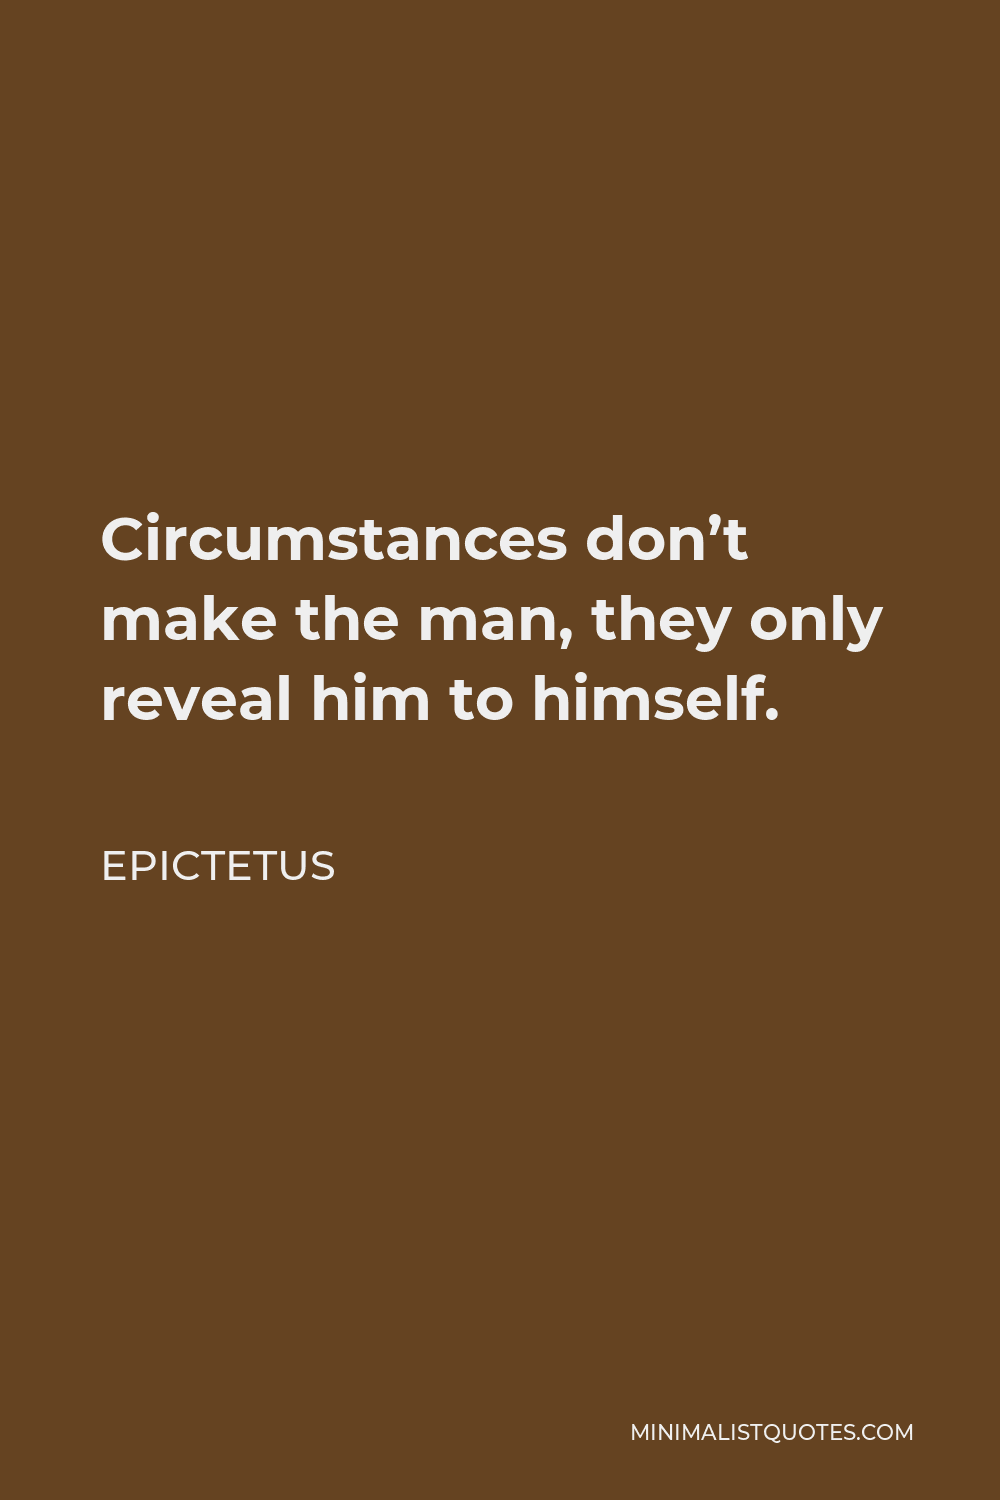 Epictetus Quote - Circumstances don’t make the man, they only reveal him to himself.